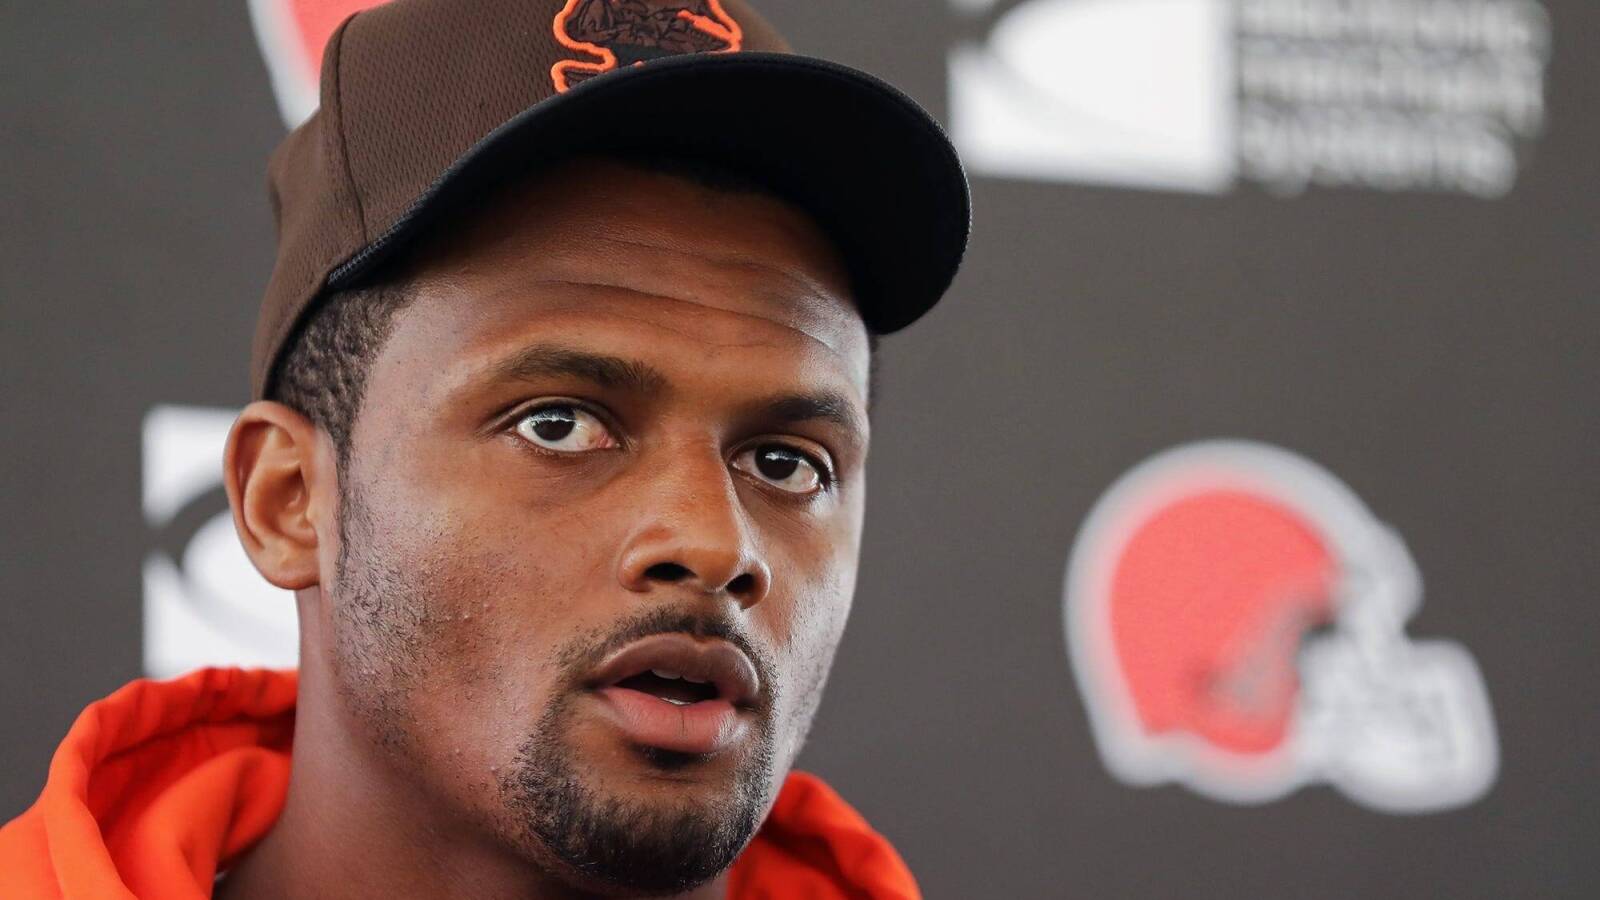 Yet another lawsuit is filed against Browns QB Deshaun Watson over alleged sexual misconduct